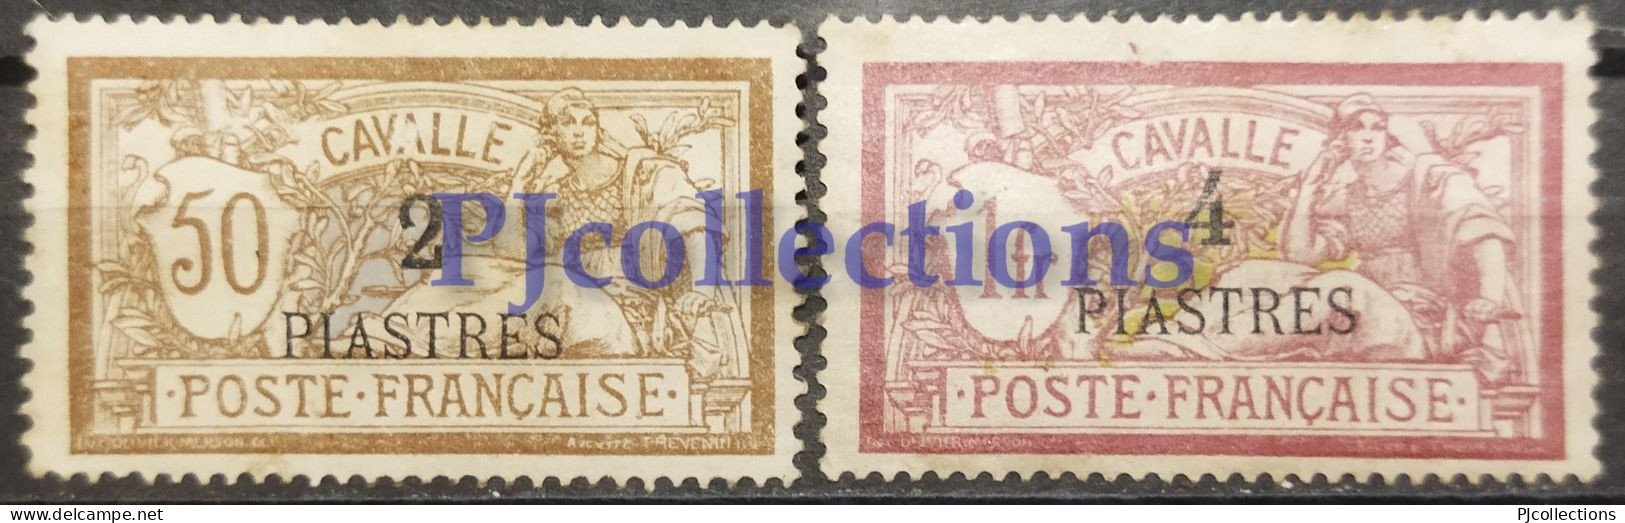 N1120- CAVALLE 1902 LIBERTY AND PEACE SOVRASTAMPATI - OVERPRINT SET 2 STAMPS MH - Unused Stamps